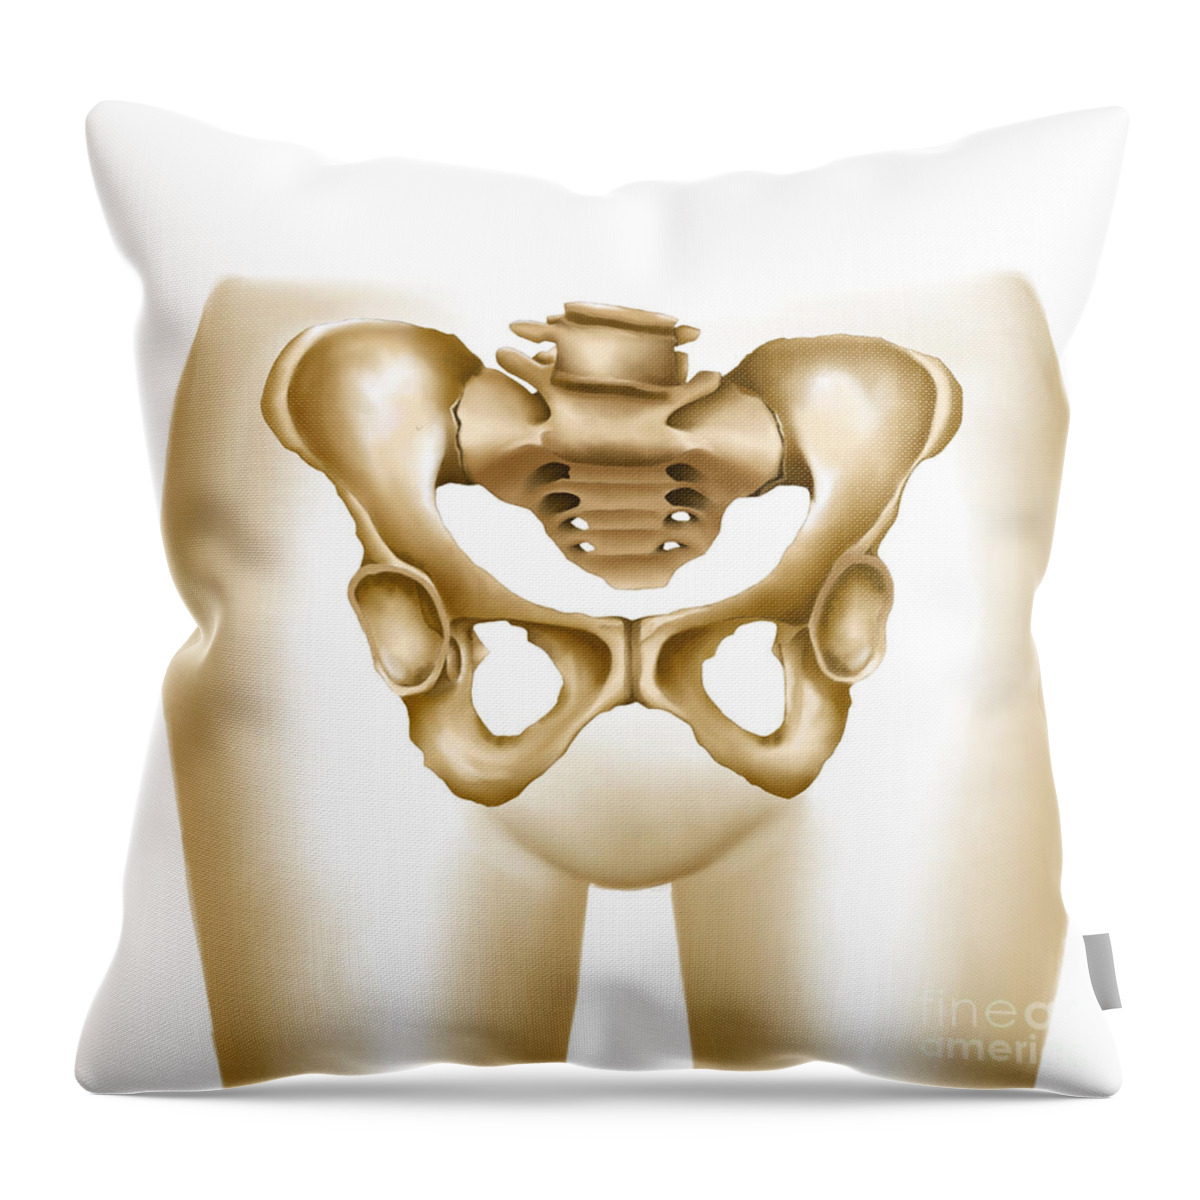 Anatomy Of Female Hips And Pelvic Bones Throw Pillow by Stocktrek Images -  Pixels